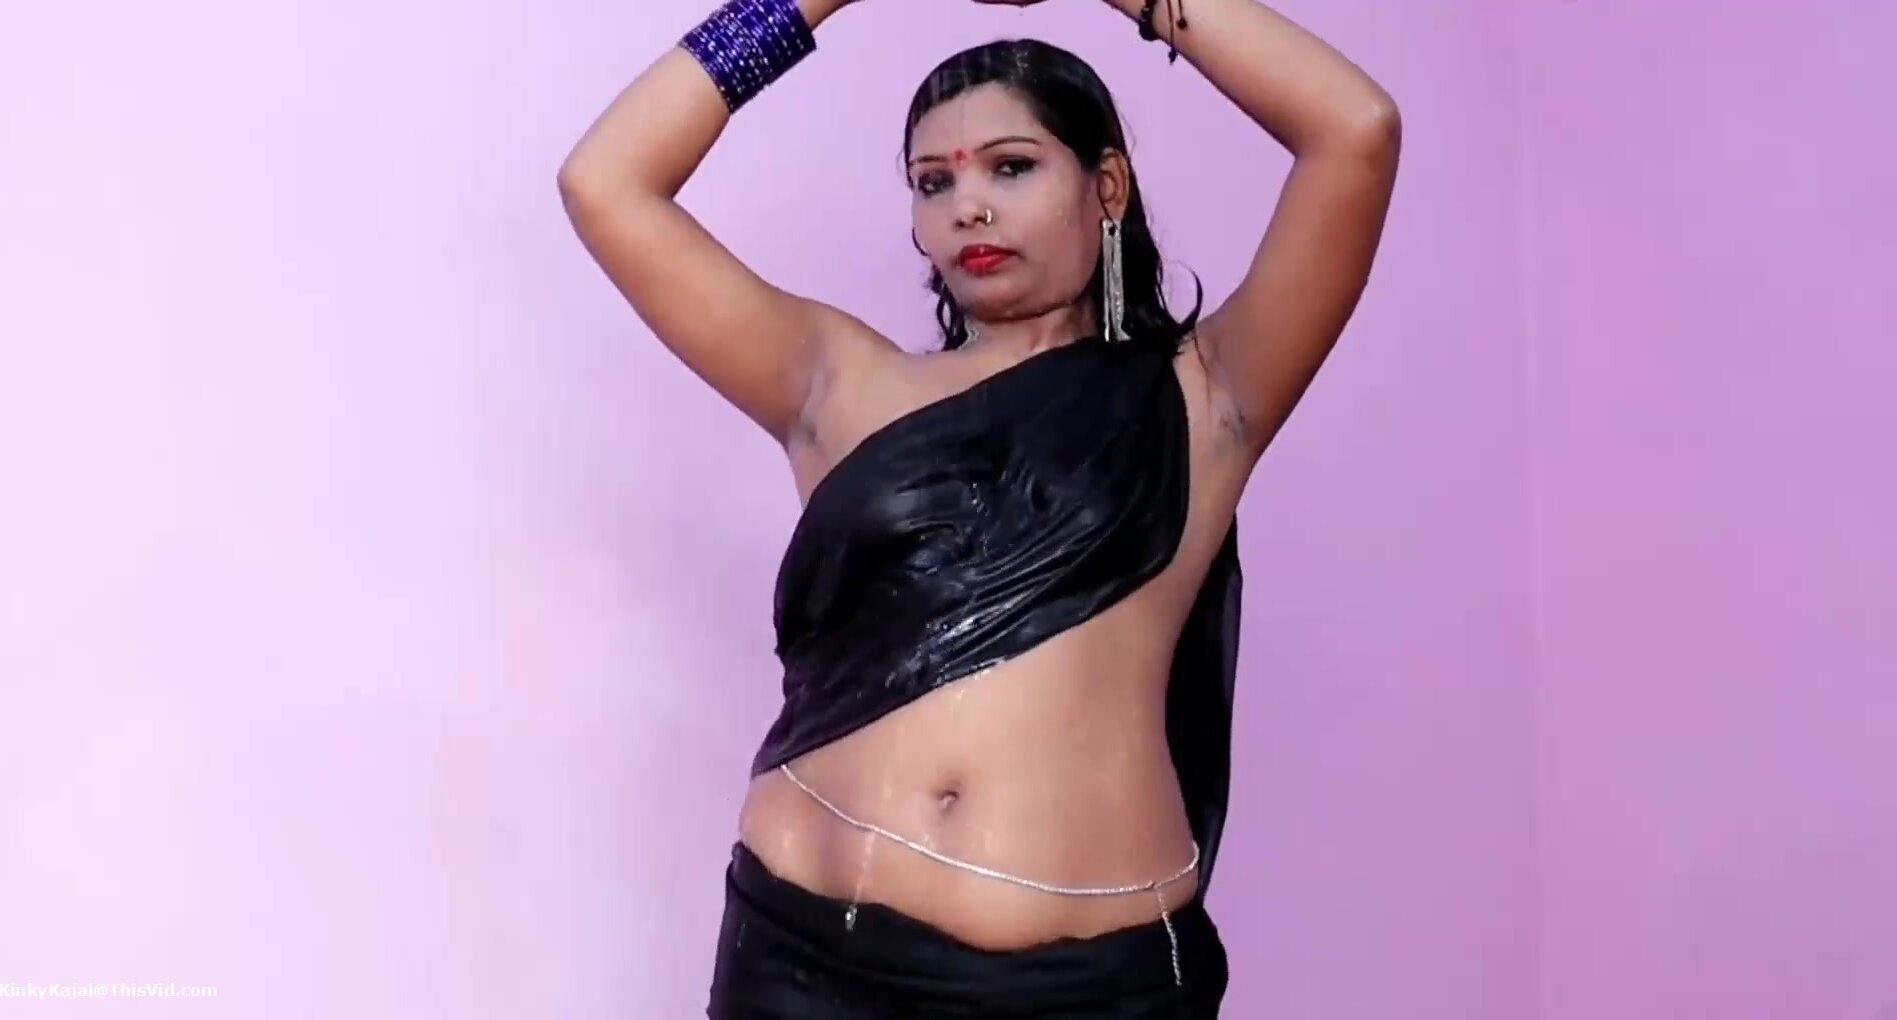 Sexy Indian lady Full Nude Bathing in Black Saree - ThisVid.com